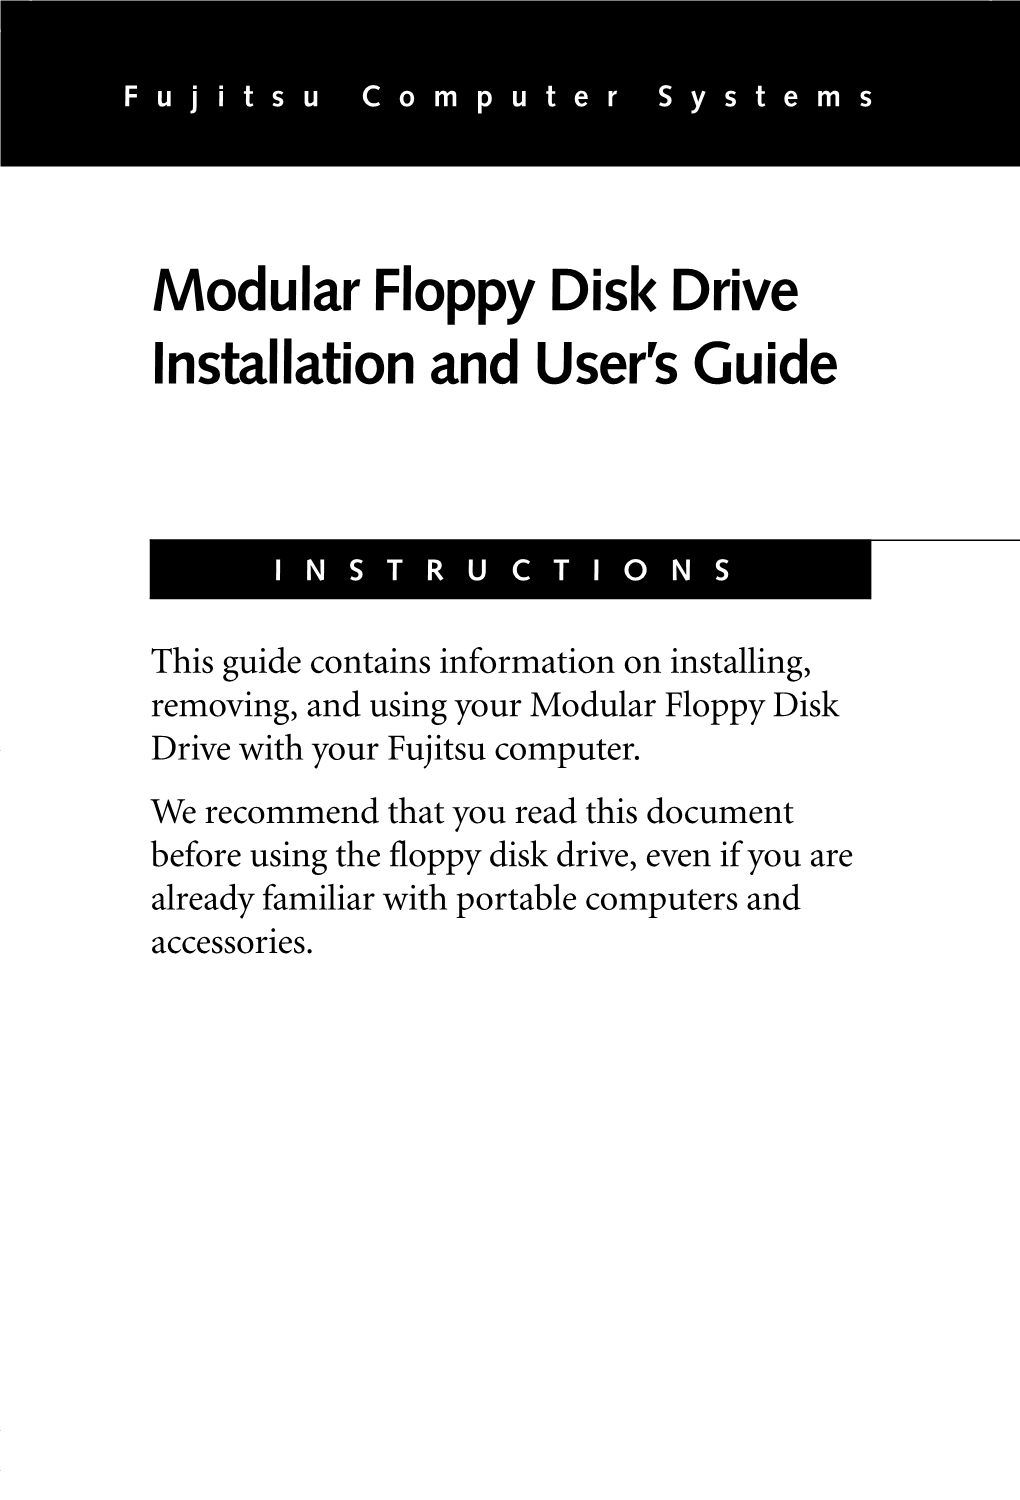 Modular Floppy Disk Drive Installation and User's Guide